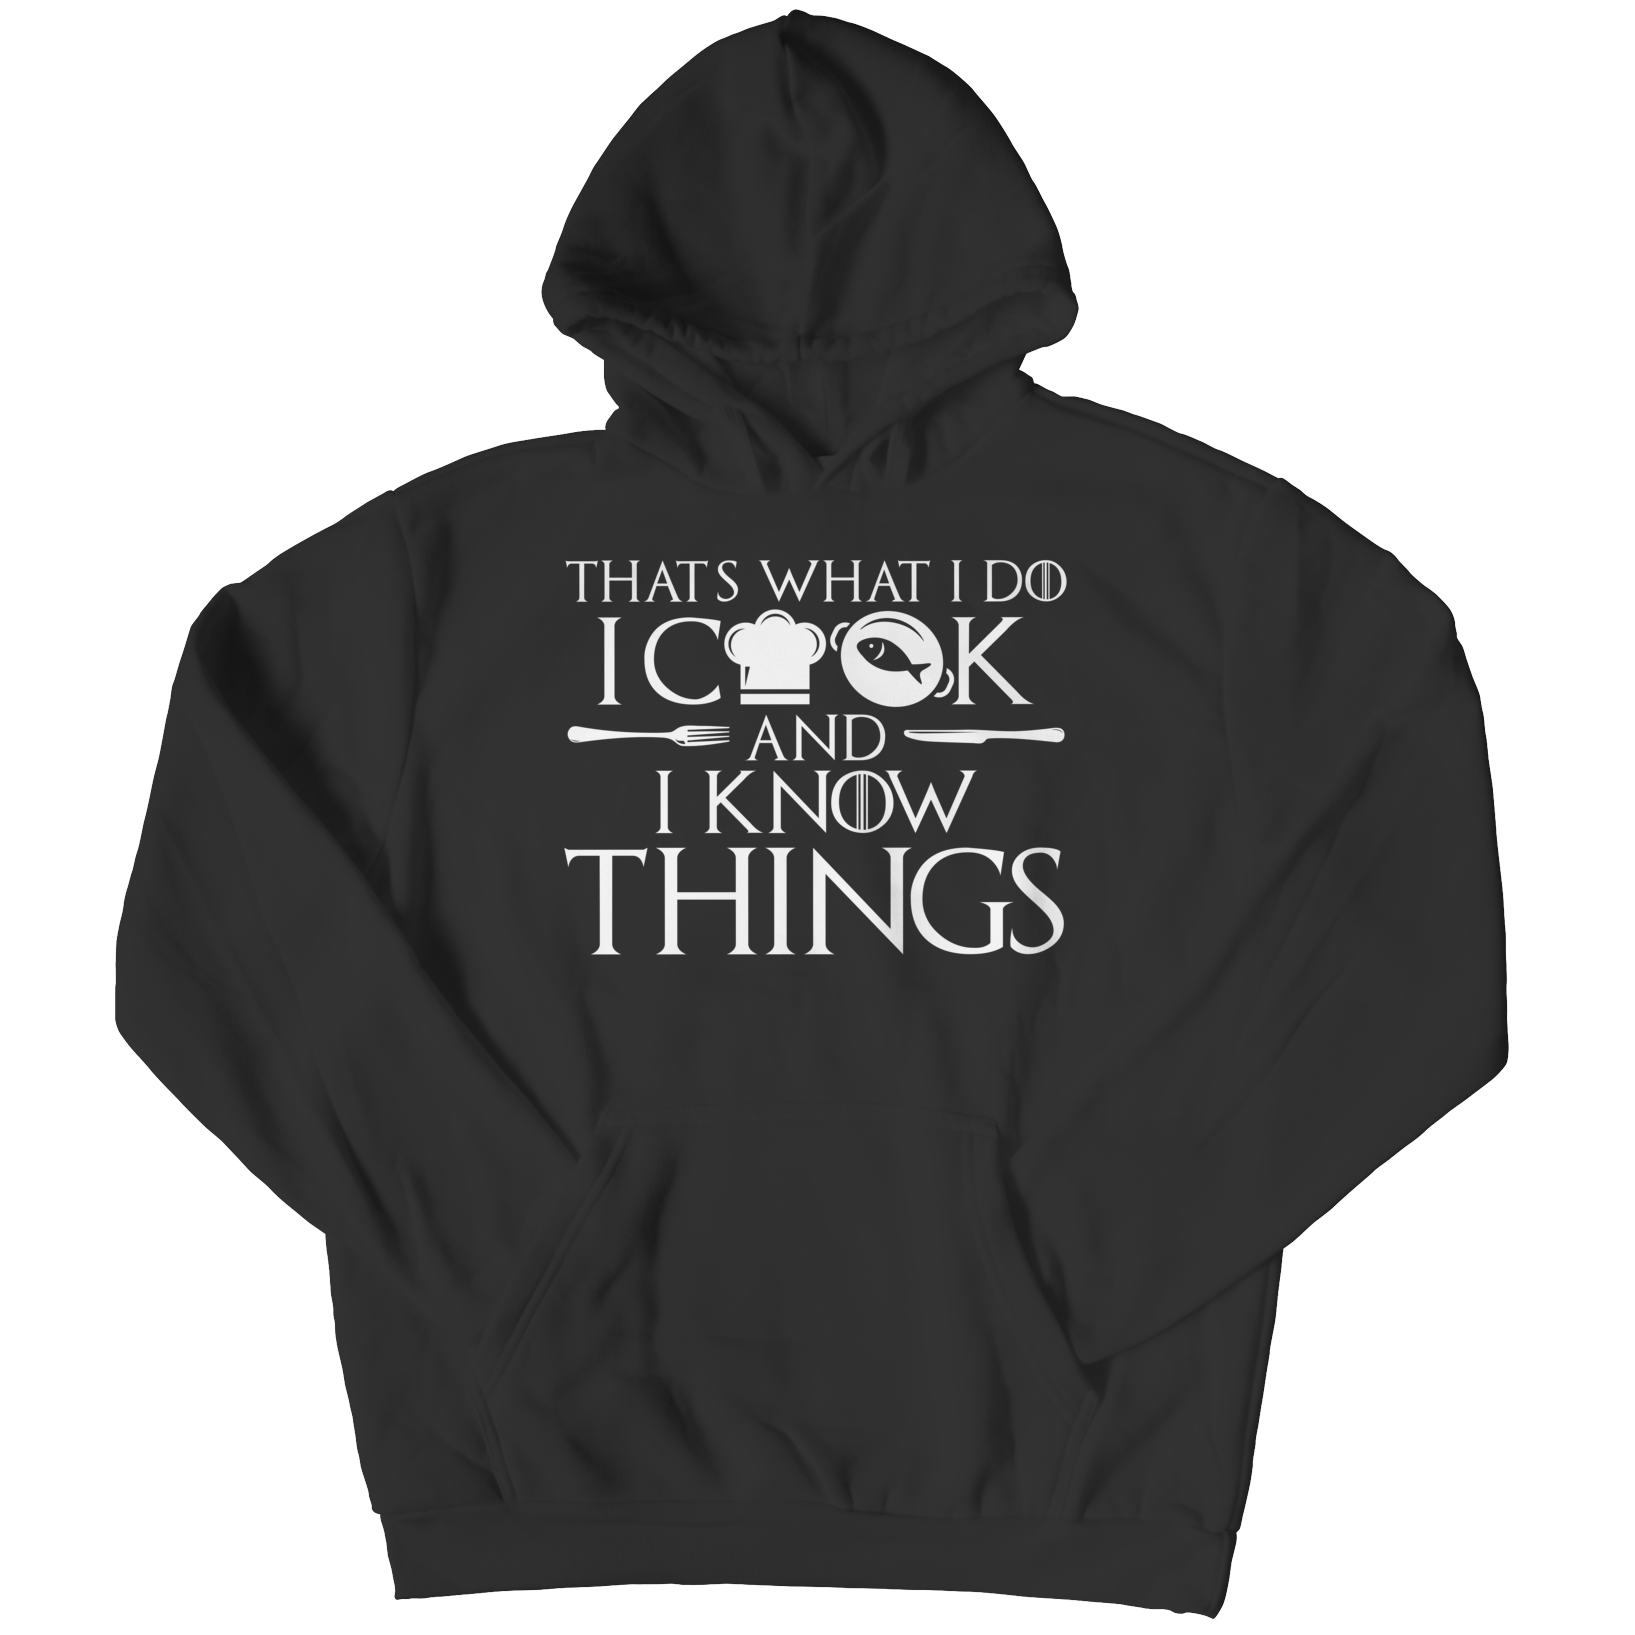 I Cook And I Know Things Hoodie